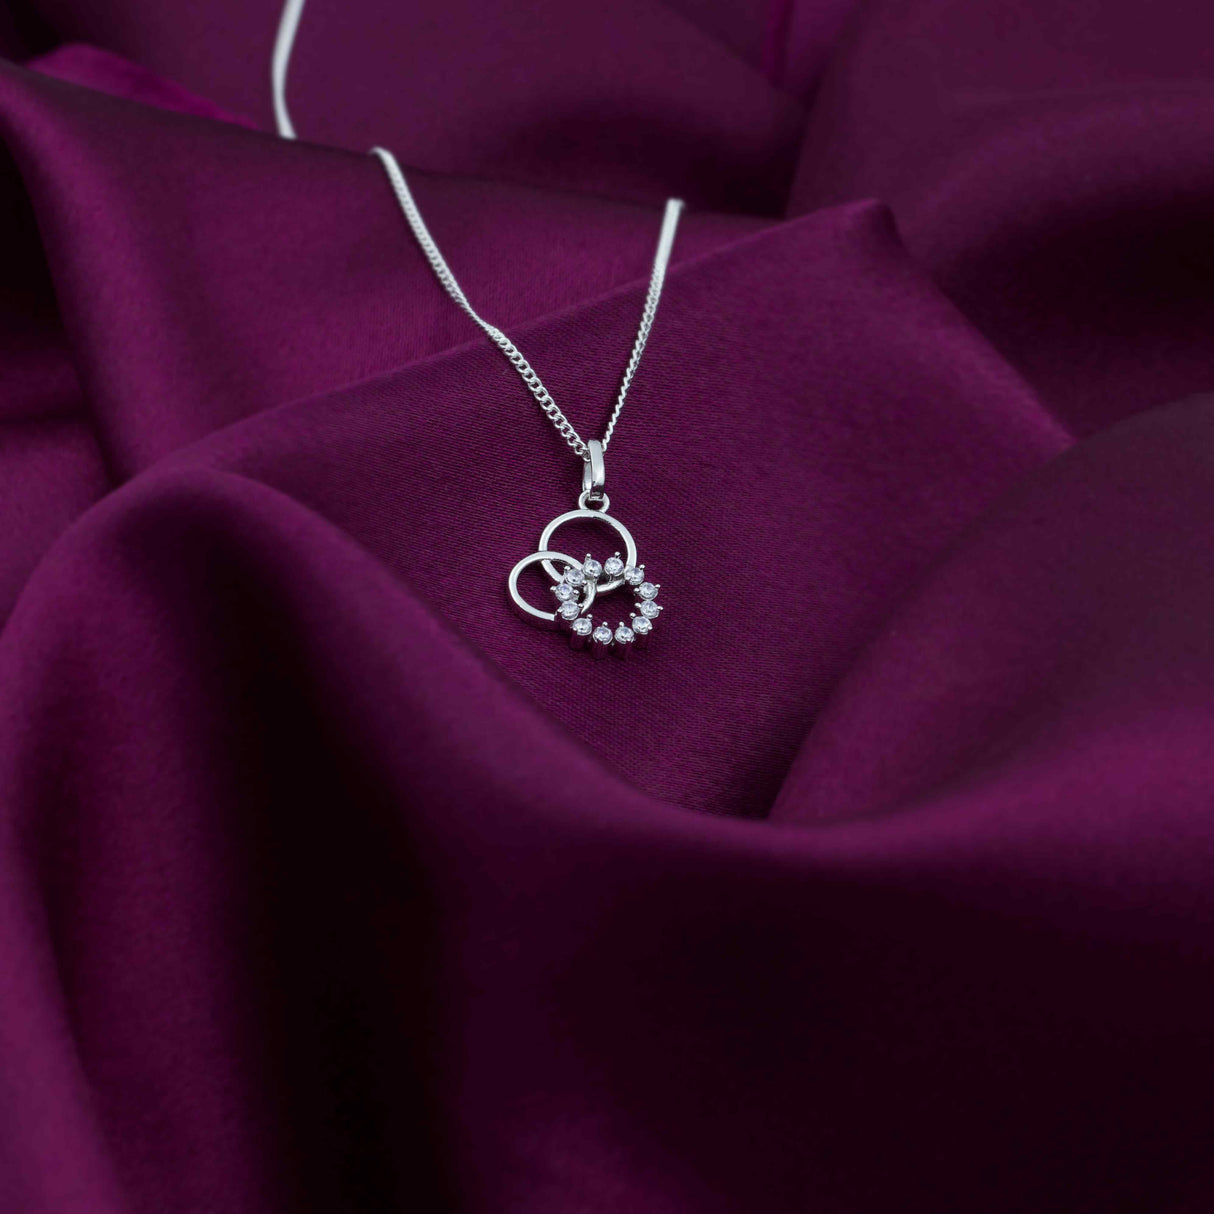 Entwined Circles Blossom Silver Pendant With Chain